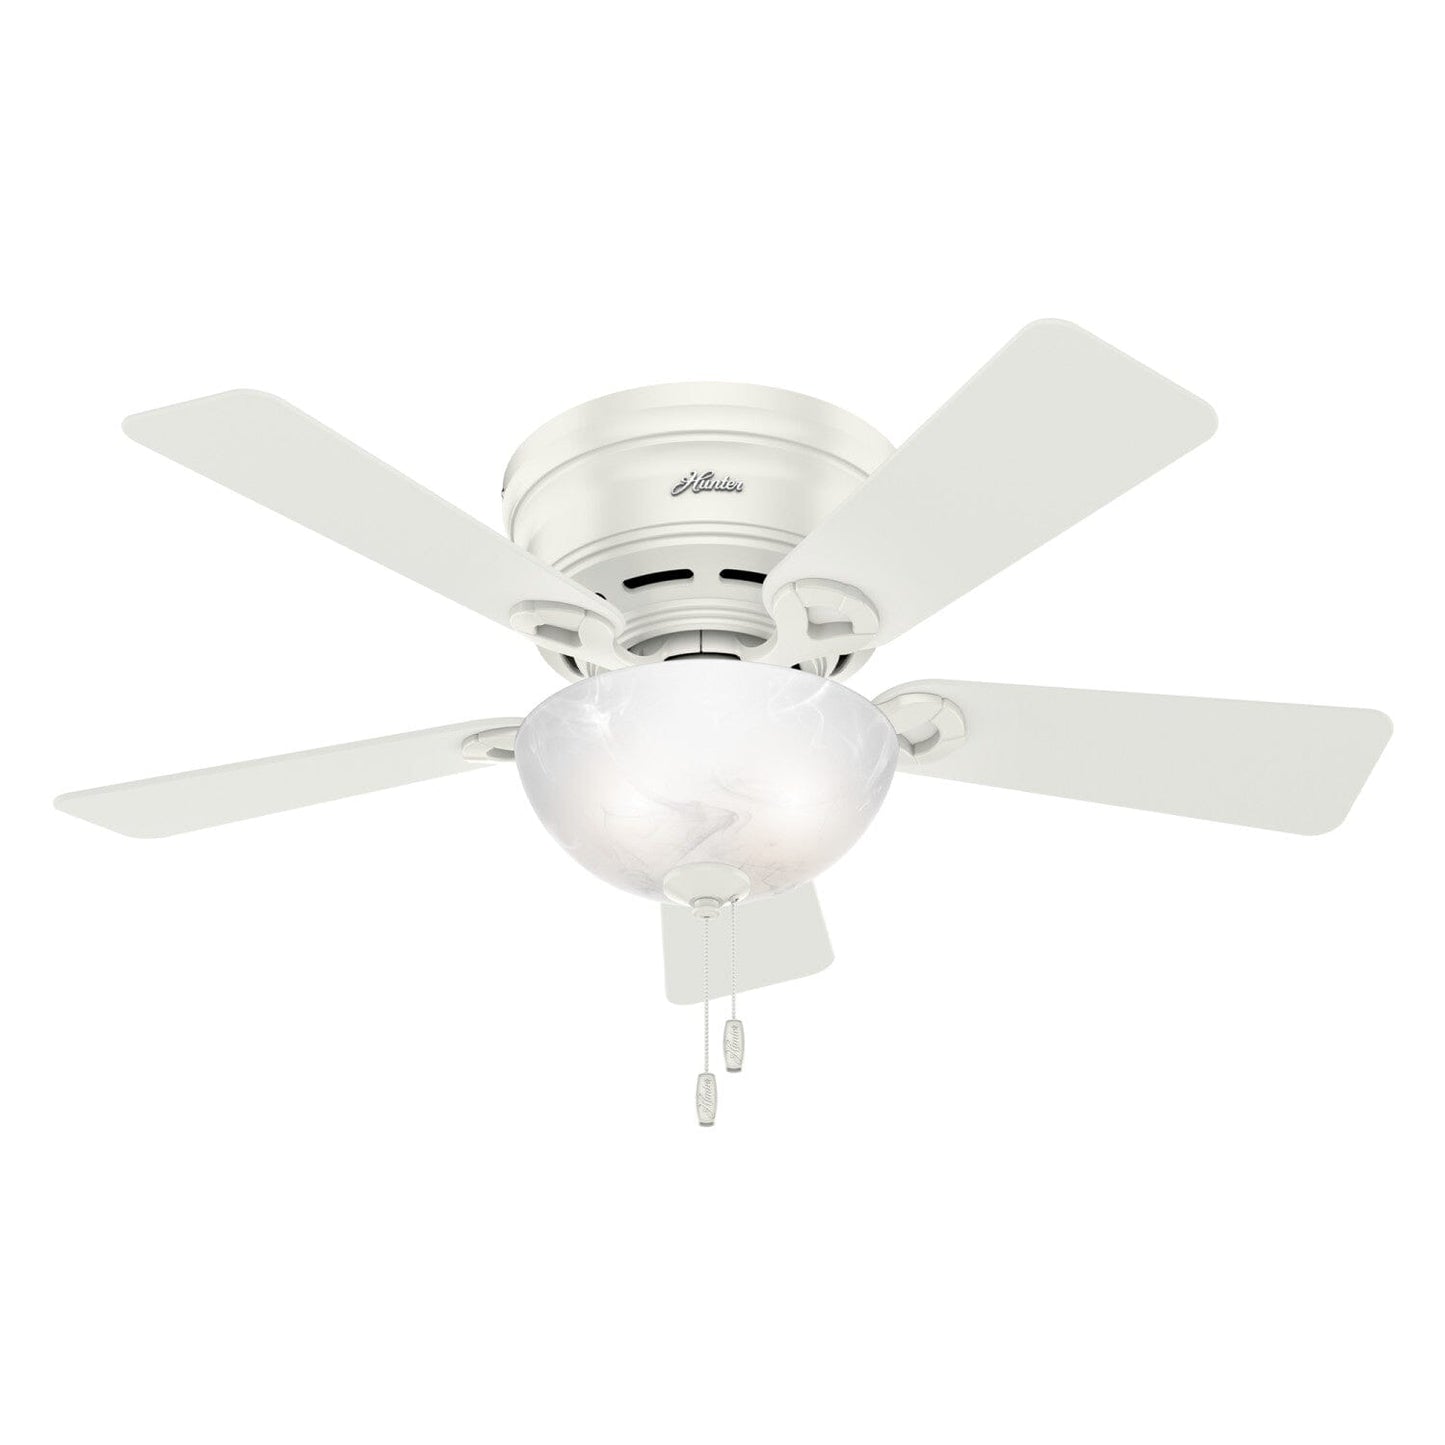 Haskell Low Profile with Light 42 inch Ceiling Fans Hunter Fresh White - Fresh White 